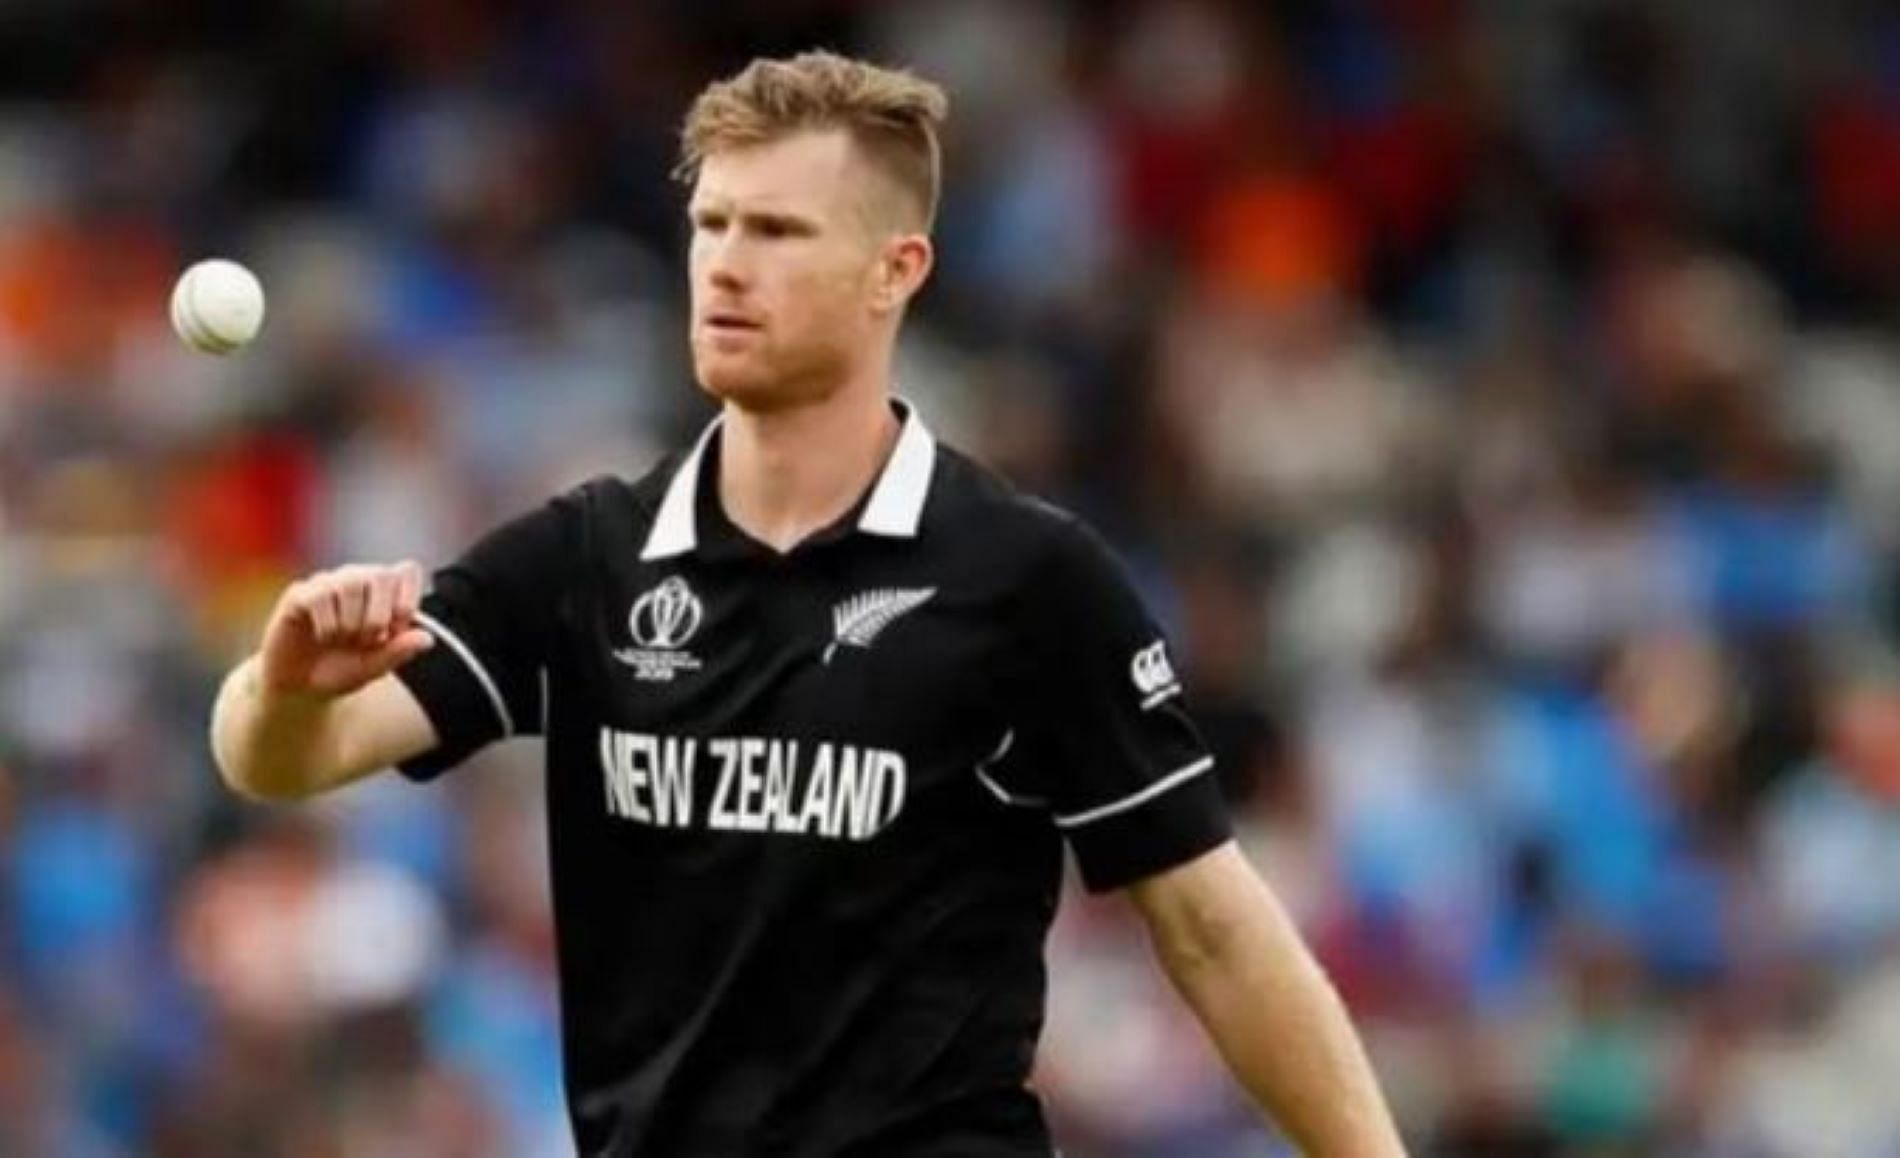 Neesham played in two of the three T20Is against UAE